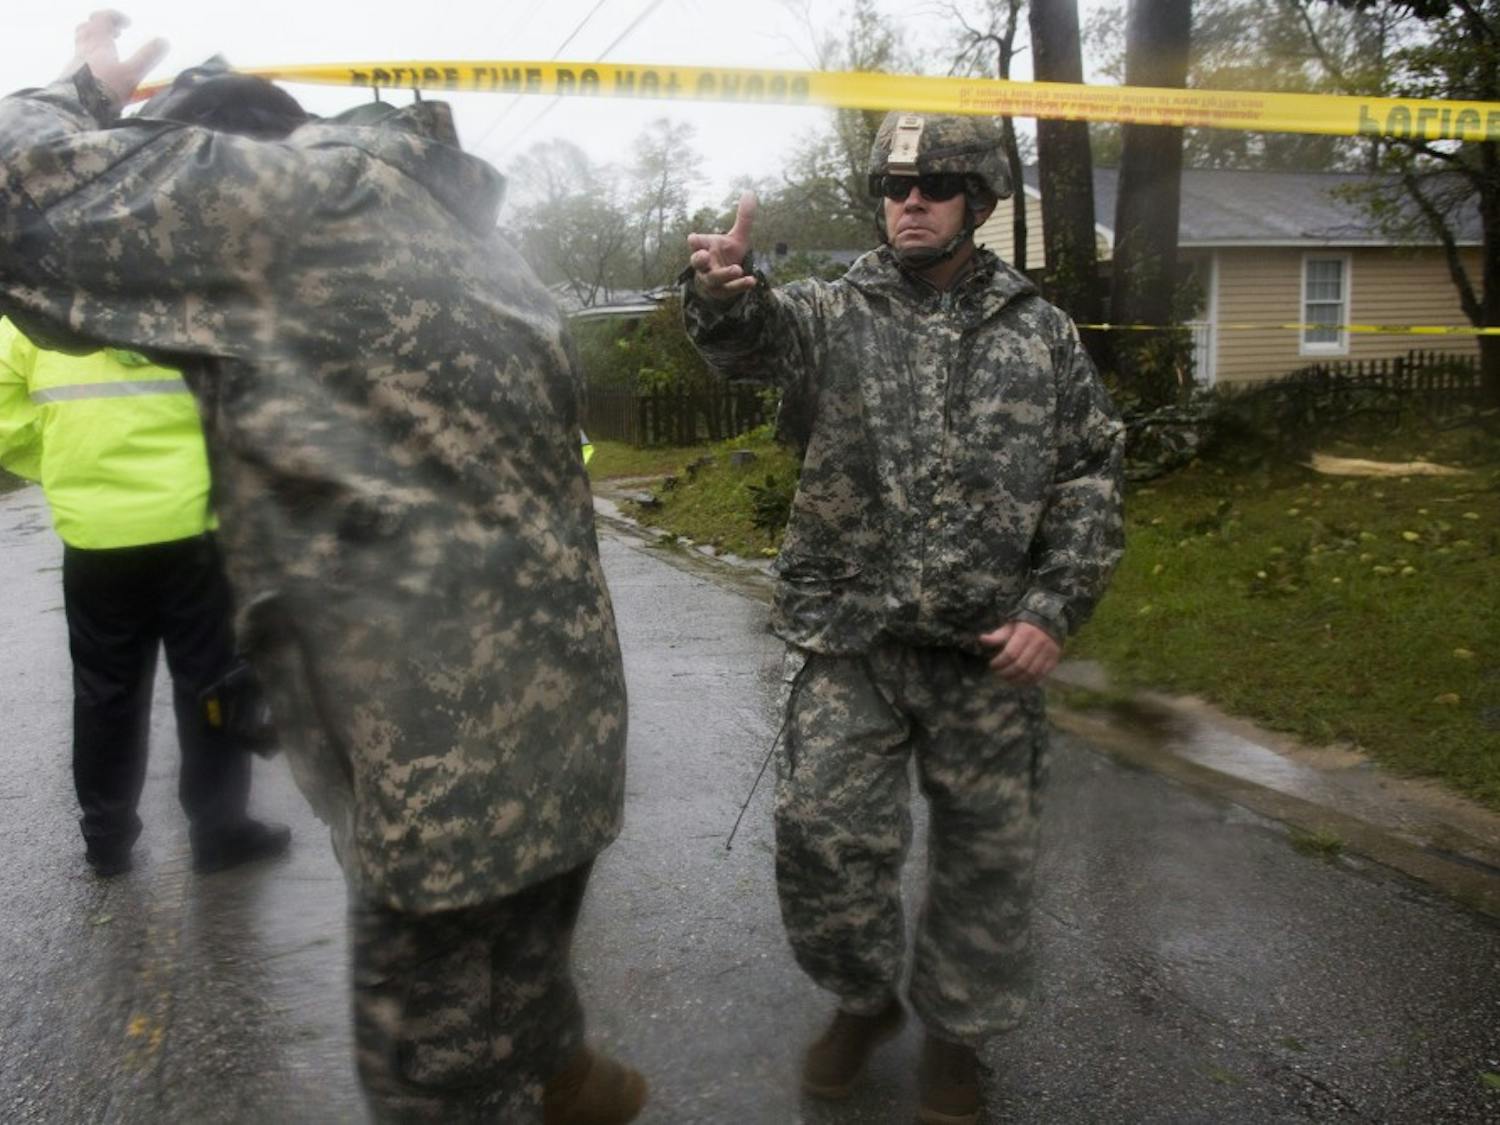 Members of the National Guard exit the scene where a fallen tree, due to hurricane Florence, critically injured a father and took the life of a mother and infant on Friday, September 14th in Wilmington, NC. The National Guard was one of many first-responders that rendered assistance in the recuse and subsequent recovery efforts at a residence on Mercer Ave, in Wilmington.